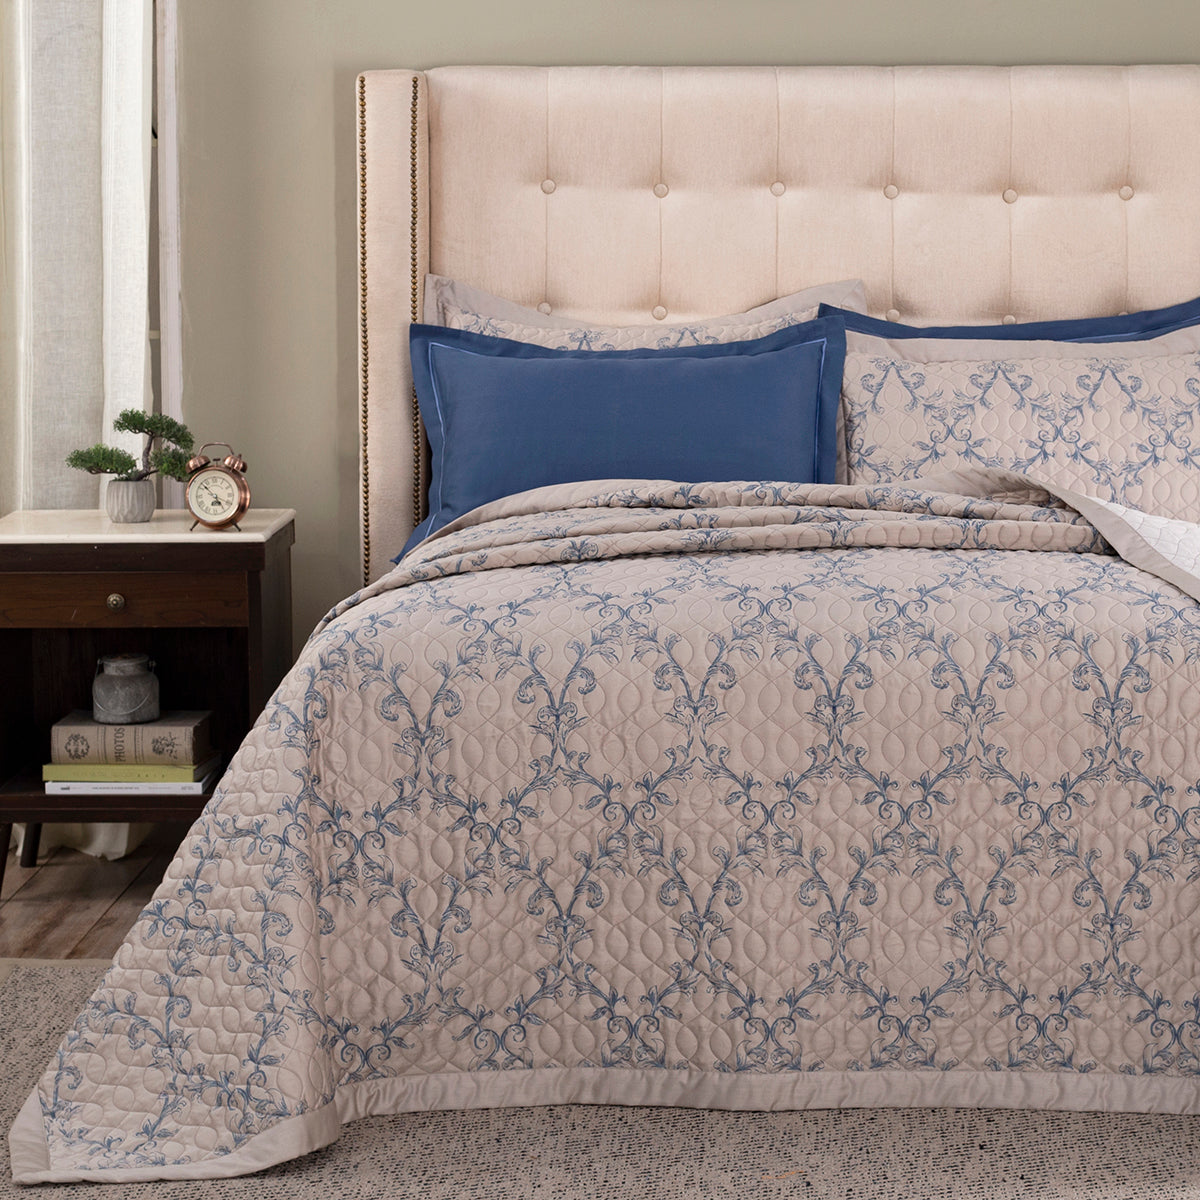 Grandeur Verona Summer AC Quilt/Quilted Bed Cover/Comforter Blue